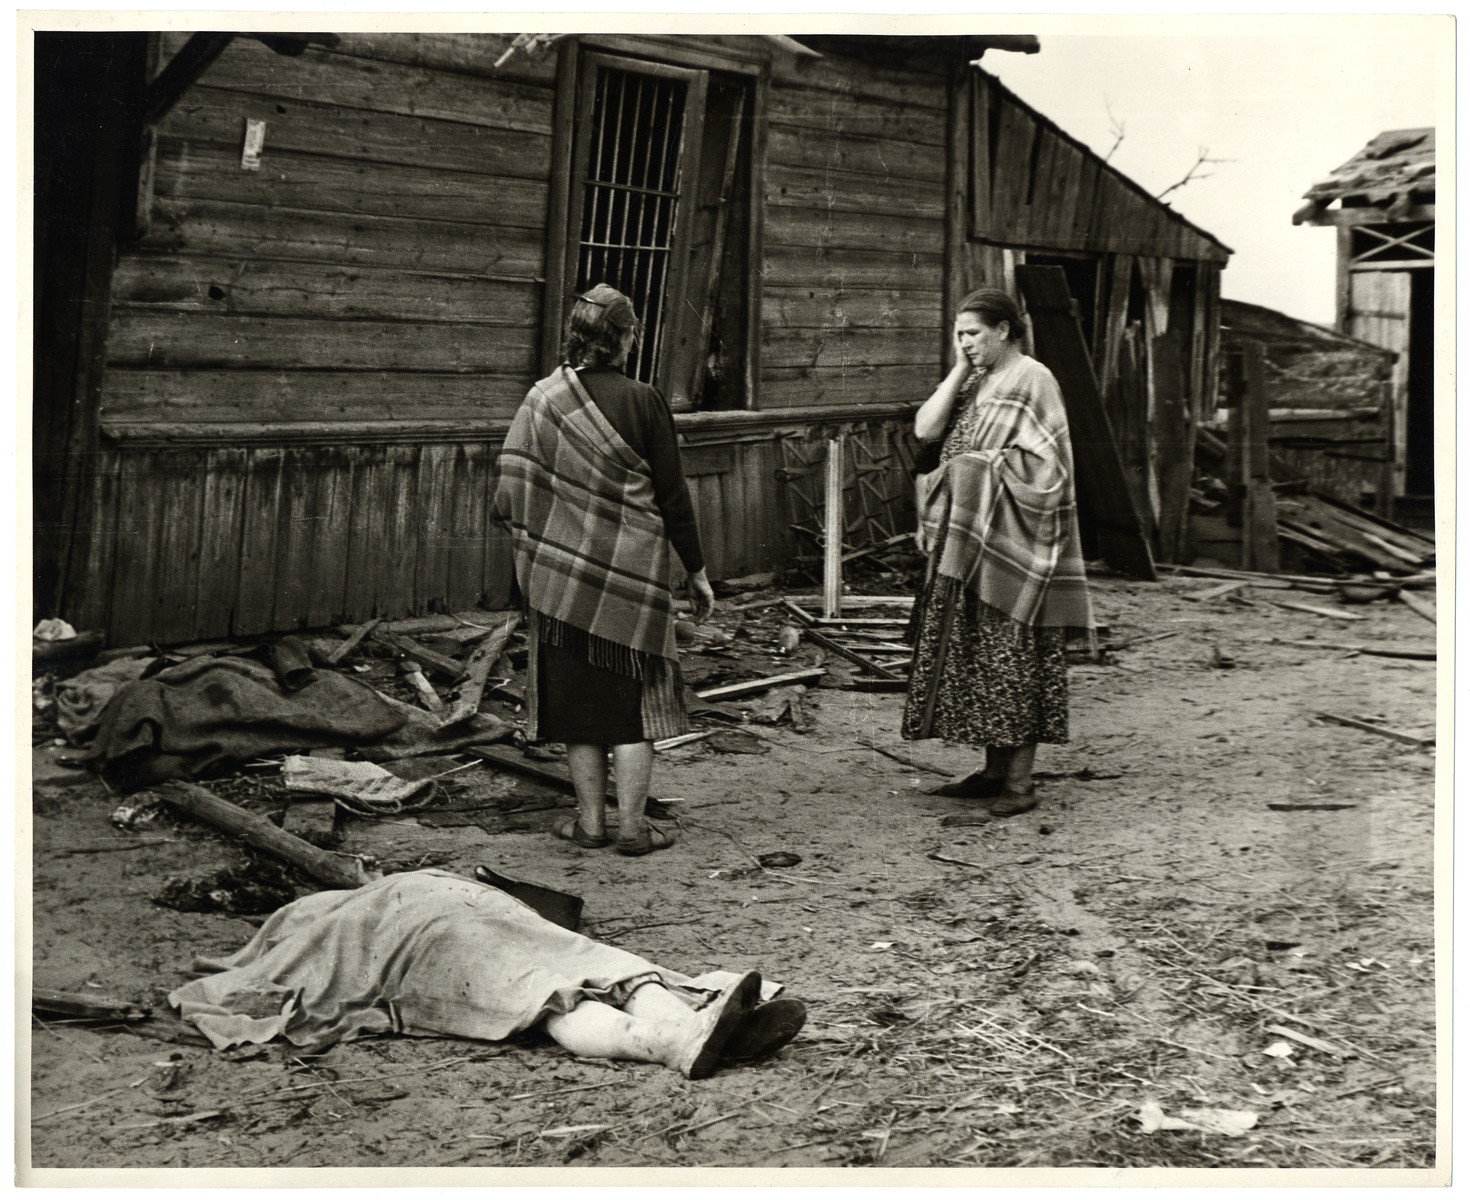 Two Polish women stand horrified after the destruction of their homes by the Germans - in the foreground is the corpse of one of the women killed in the air raid.